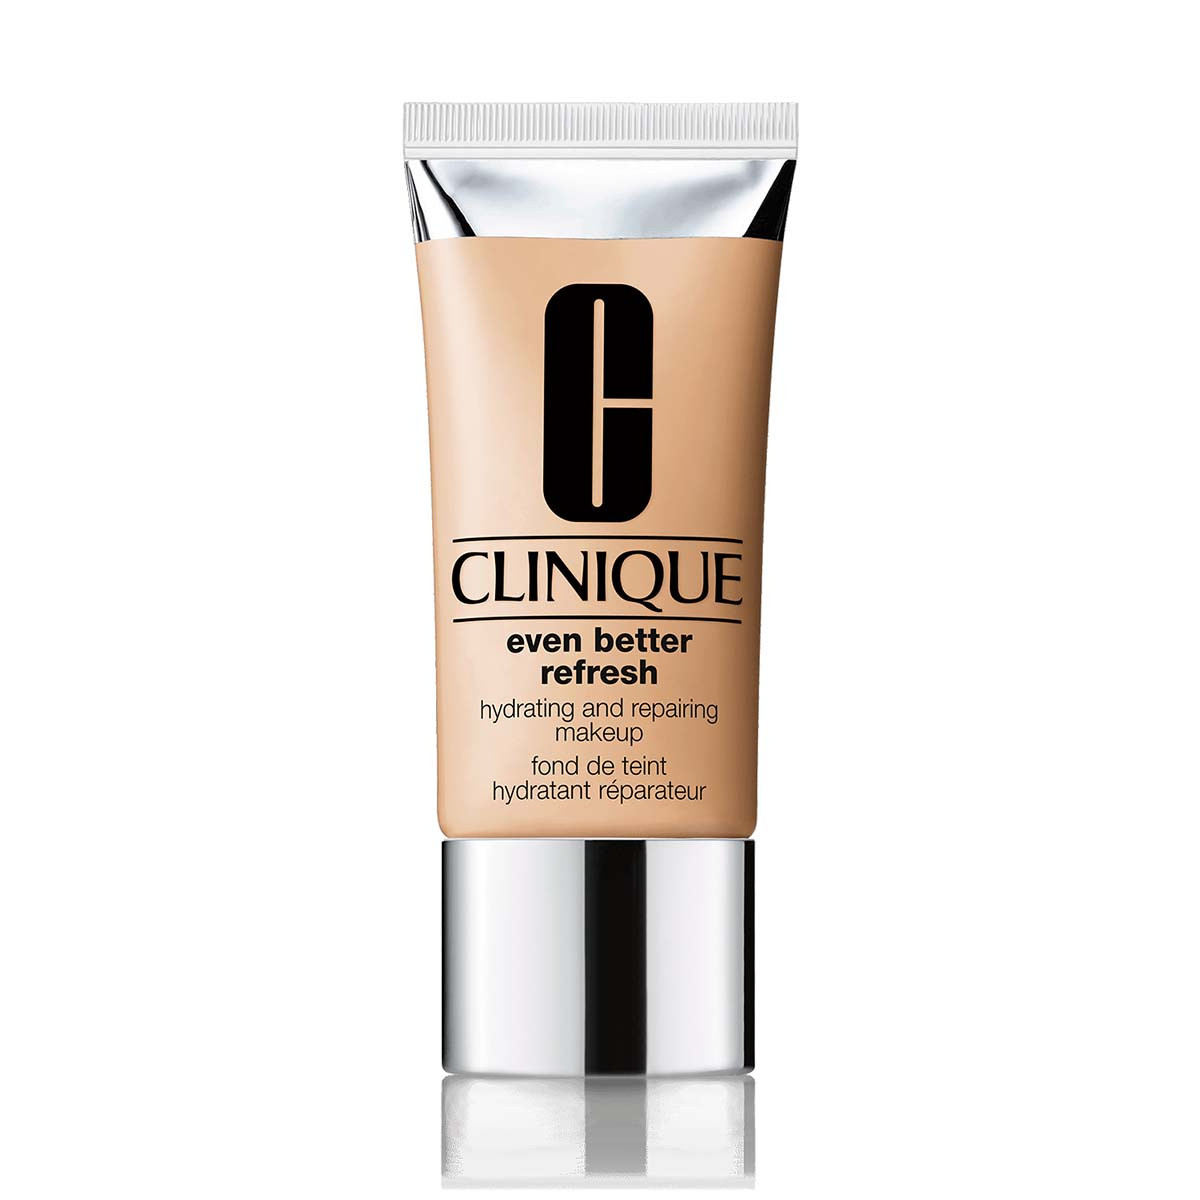 Clinique even better refresh - cn 52 neutral  30 ml, CN 52 NEUTRAL, large image number 0